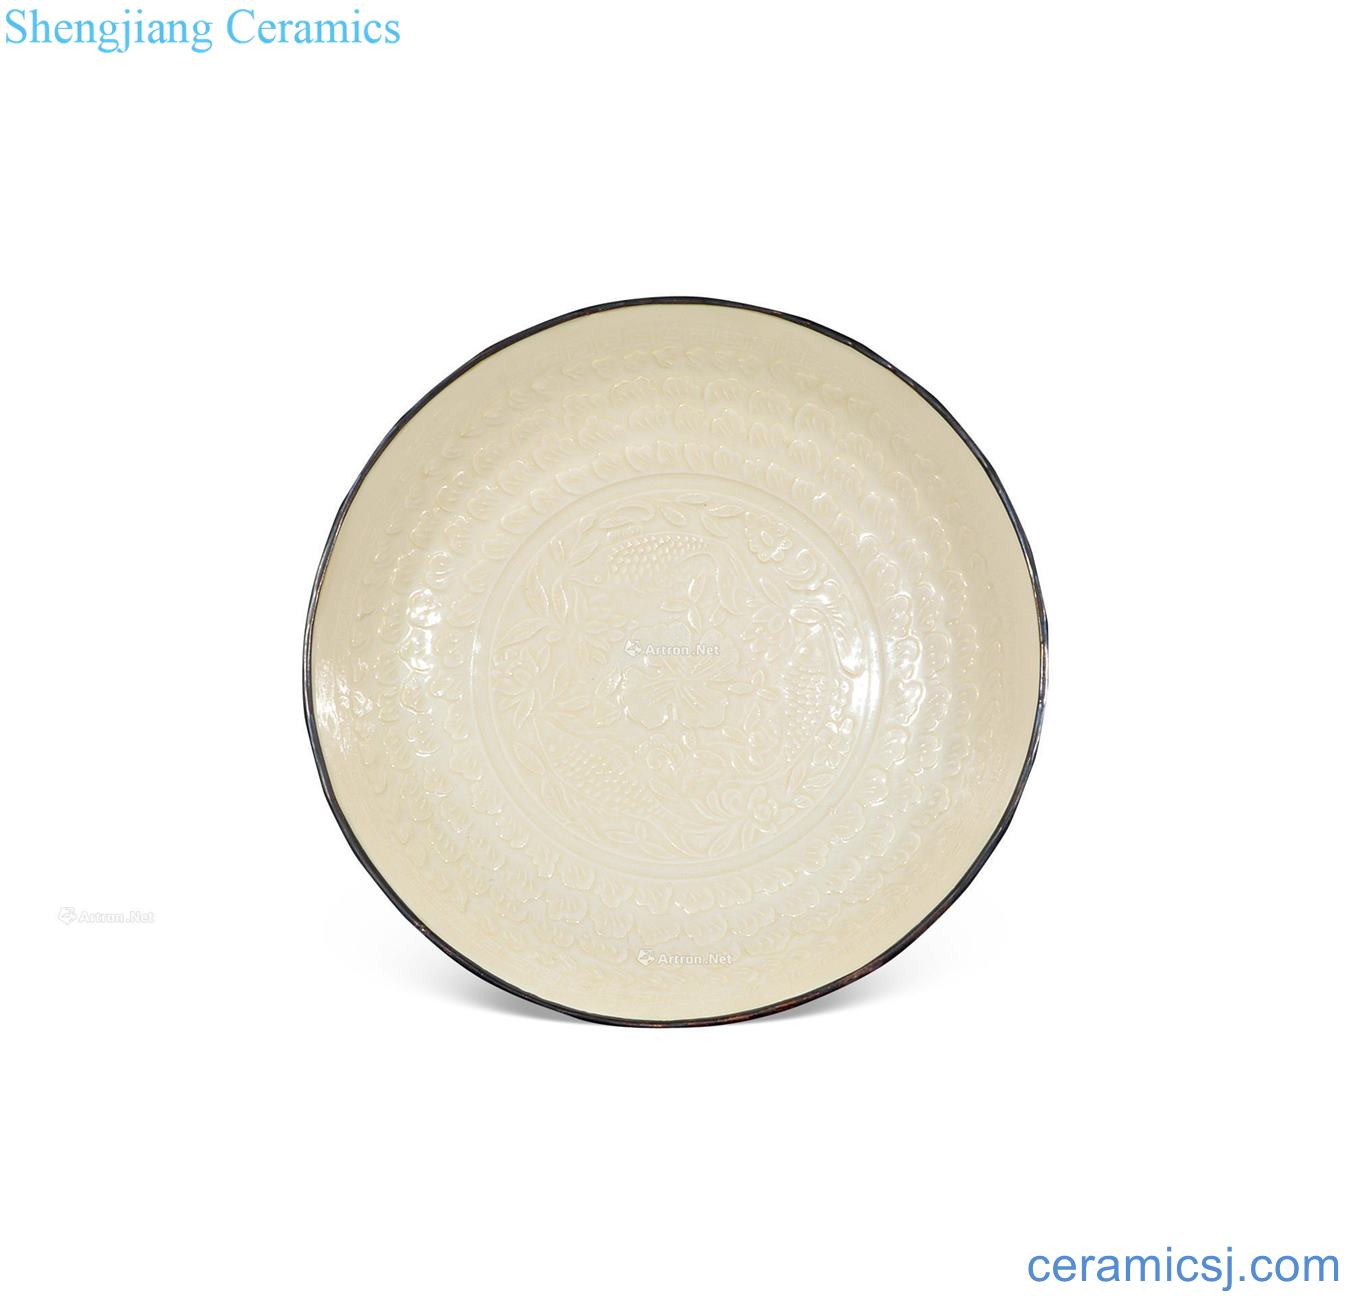 The song kiln carved decorative pattern plate